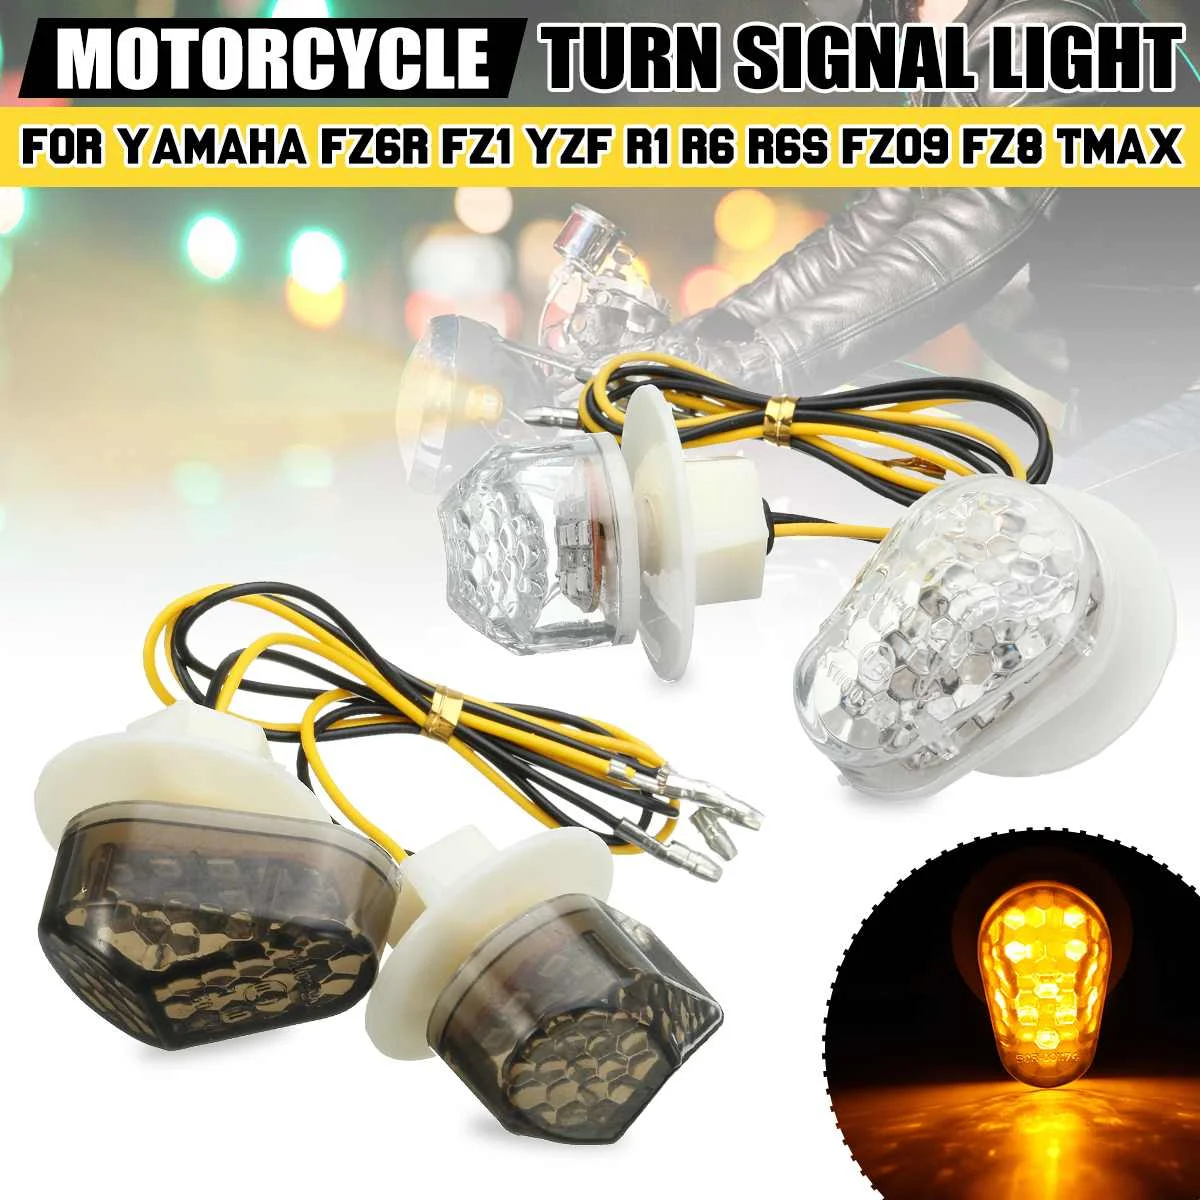 Motorcycle Mount LED Turn Signals Lights Indicator For Yamaha YZF R1 R6 R6S 02